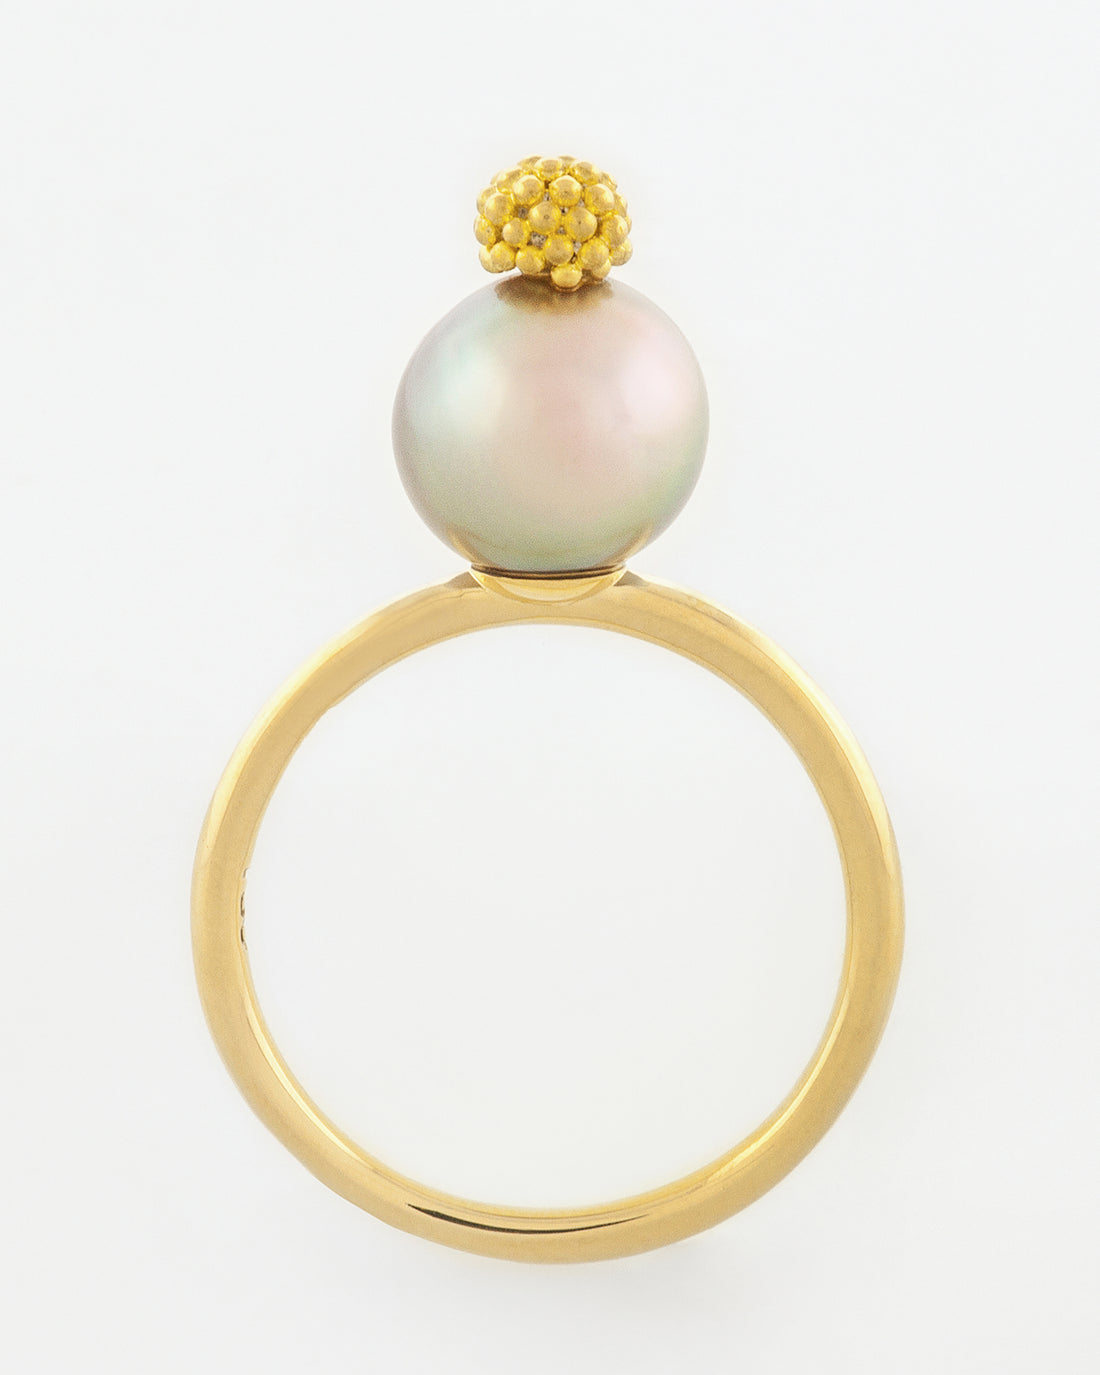 Light Cortez Pearl with 22k Graining Ring front view